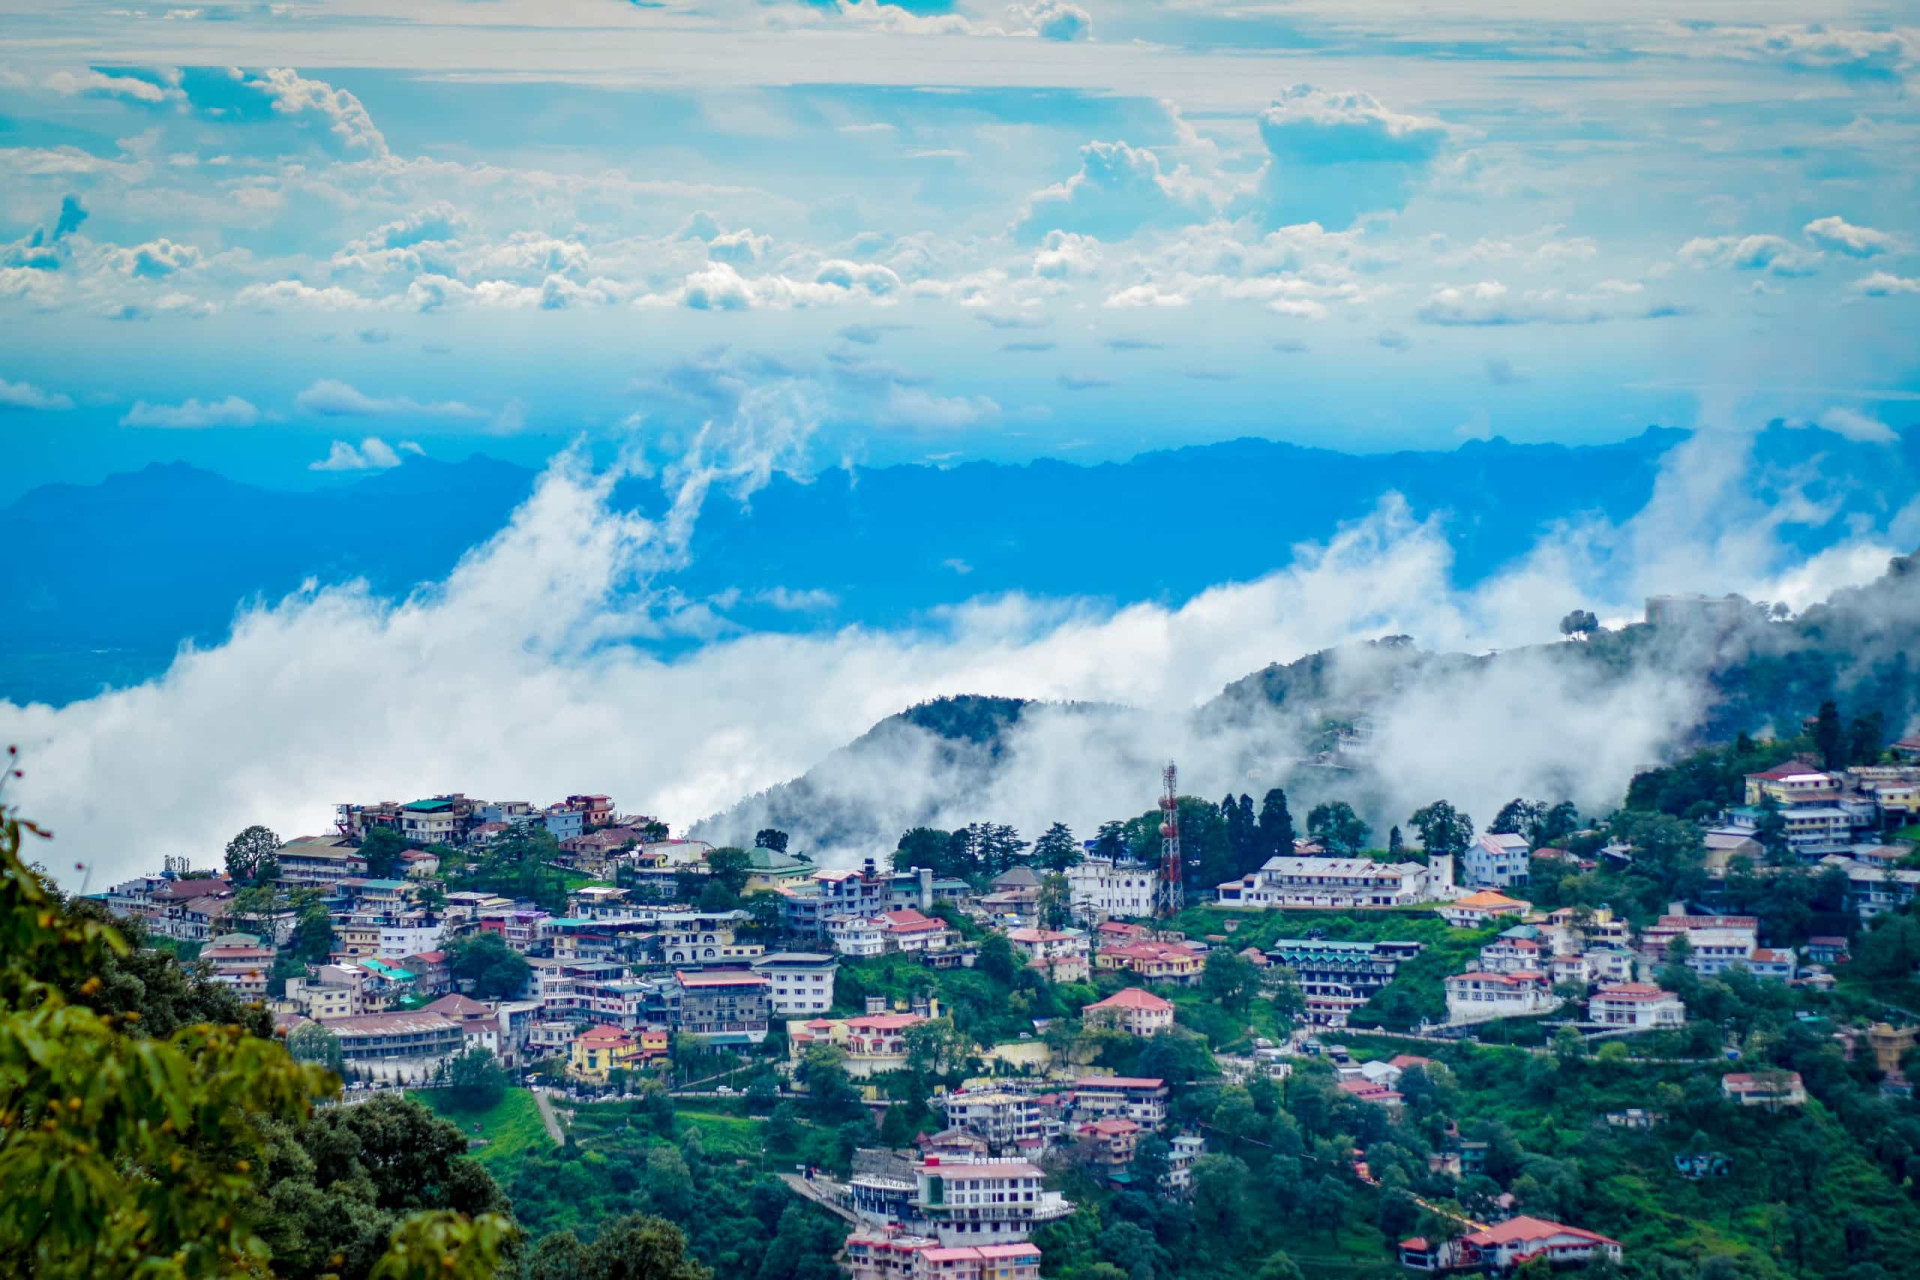 <p>Known as the "Queen of the Hills," Mussoorie is another one of India's favored hill stations. Located at a height of 2,005 m (6,578 ft) above sea level around 35 km (21 mi) from Dehradun in the state of Uttarakhand, Mussoorie affords majestic views of the Doon Valley and snow-capped Garhwal Himalayas.</p><p>You may also like: </p>